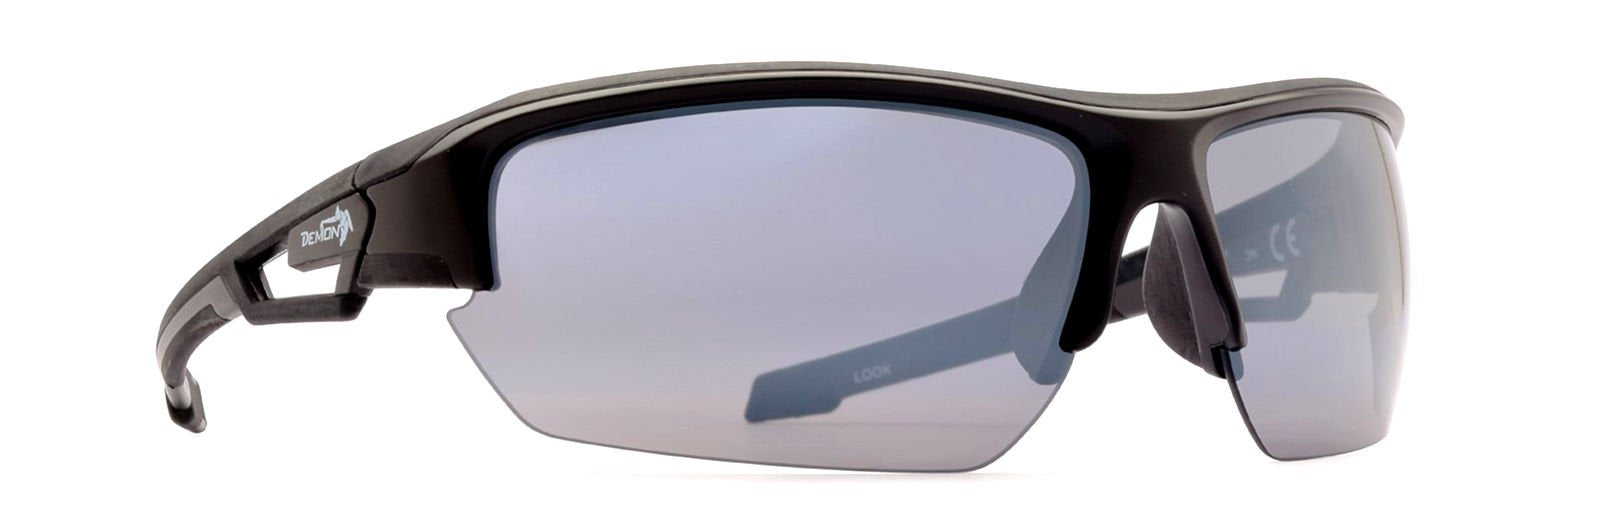 Road cycling glasses with black rubberized mirrored lenses LOOK model